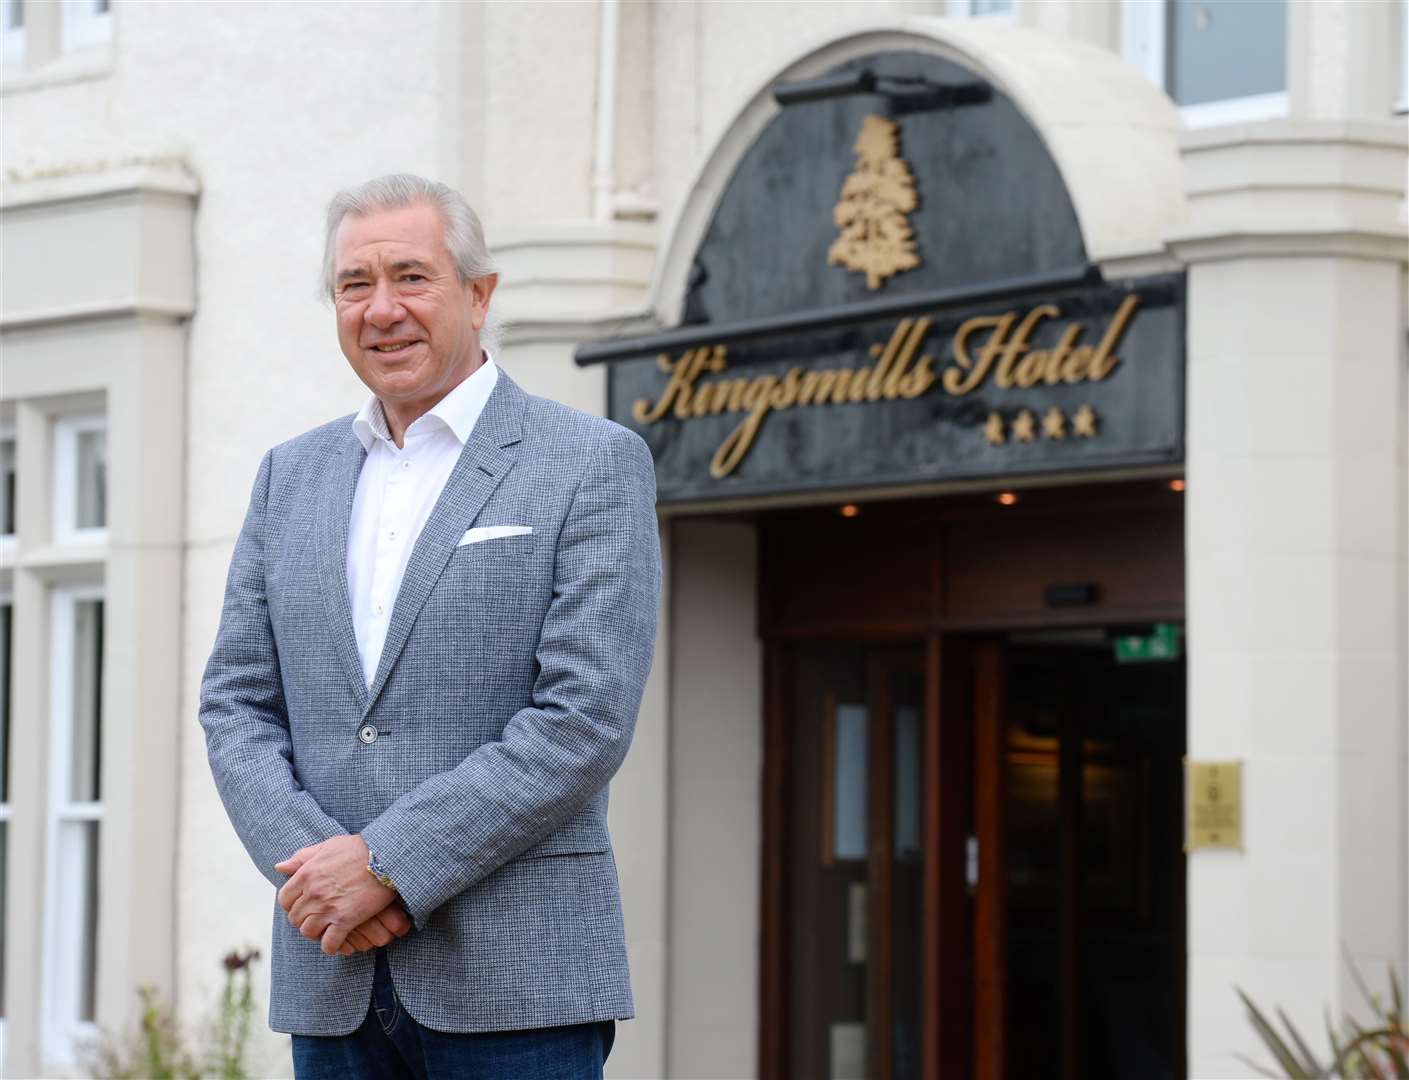 Tony Story of Kingsmills Hotel...Picture: Gary Anthony..